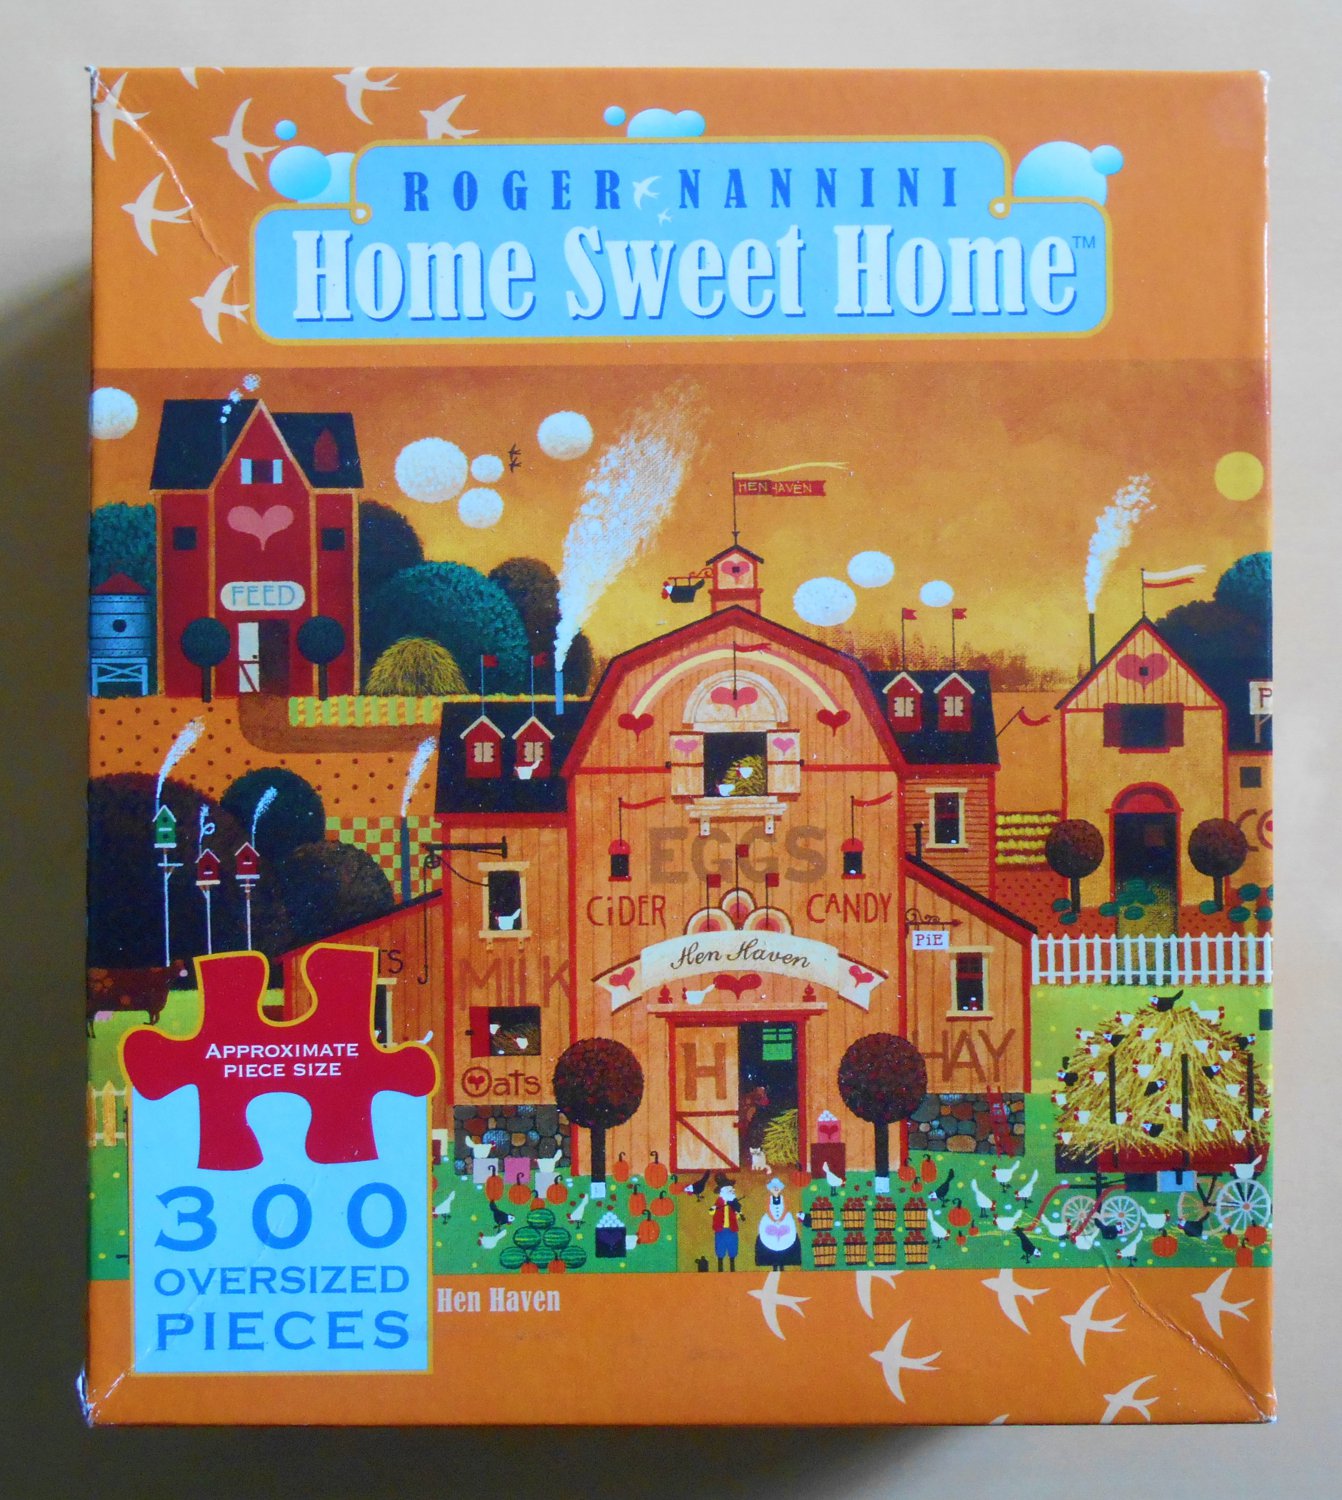 Hen Haven 300 Oversized Pieces Jigsaw Puzzle Ceaco 2208-3 Home Sweet Roger Nannini NIB New in Box